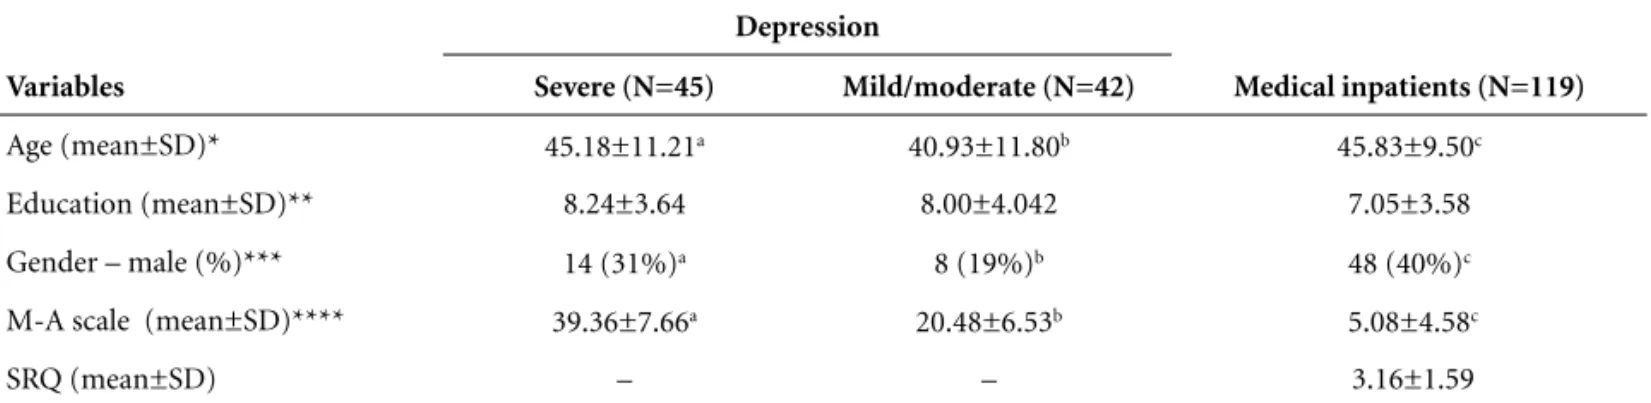 Table 1 presents demographic characteristics of sam- sam-ple. The depression group included 65 women and 22 men, with age range from 19 to 76 years (mean ±  stan-dard deviation, 43.13±11.63) and mean education 8.12±